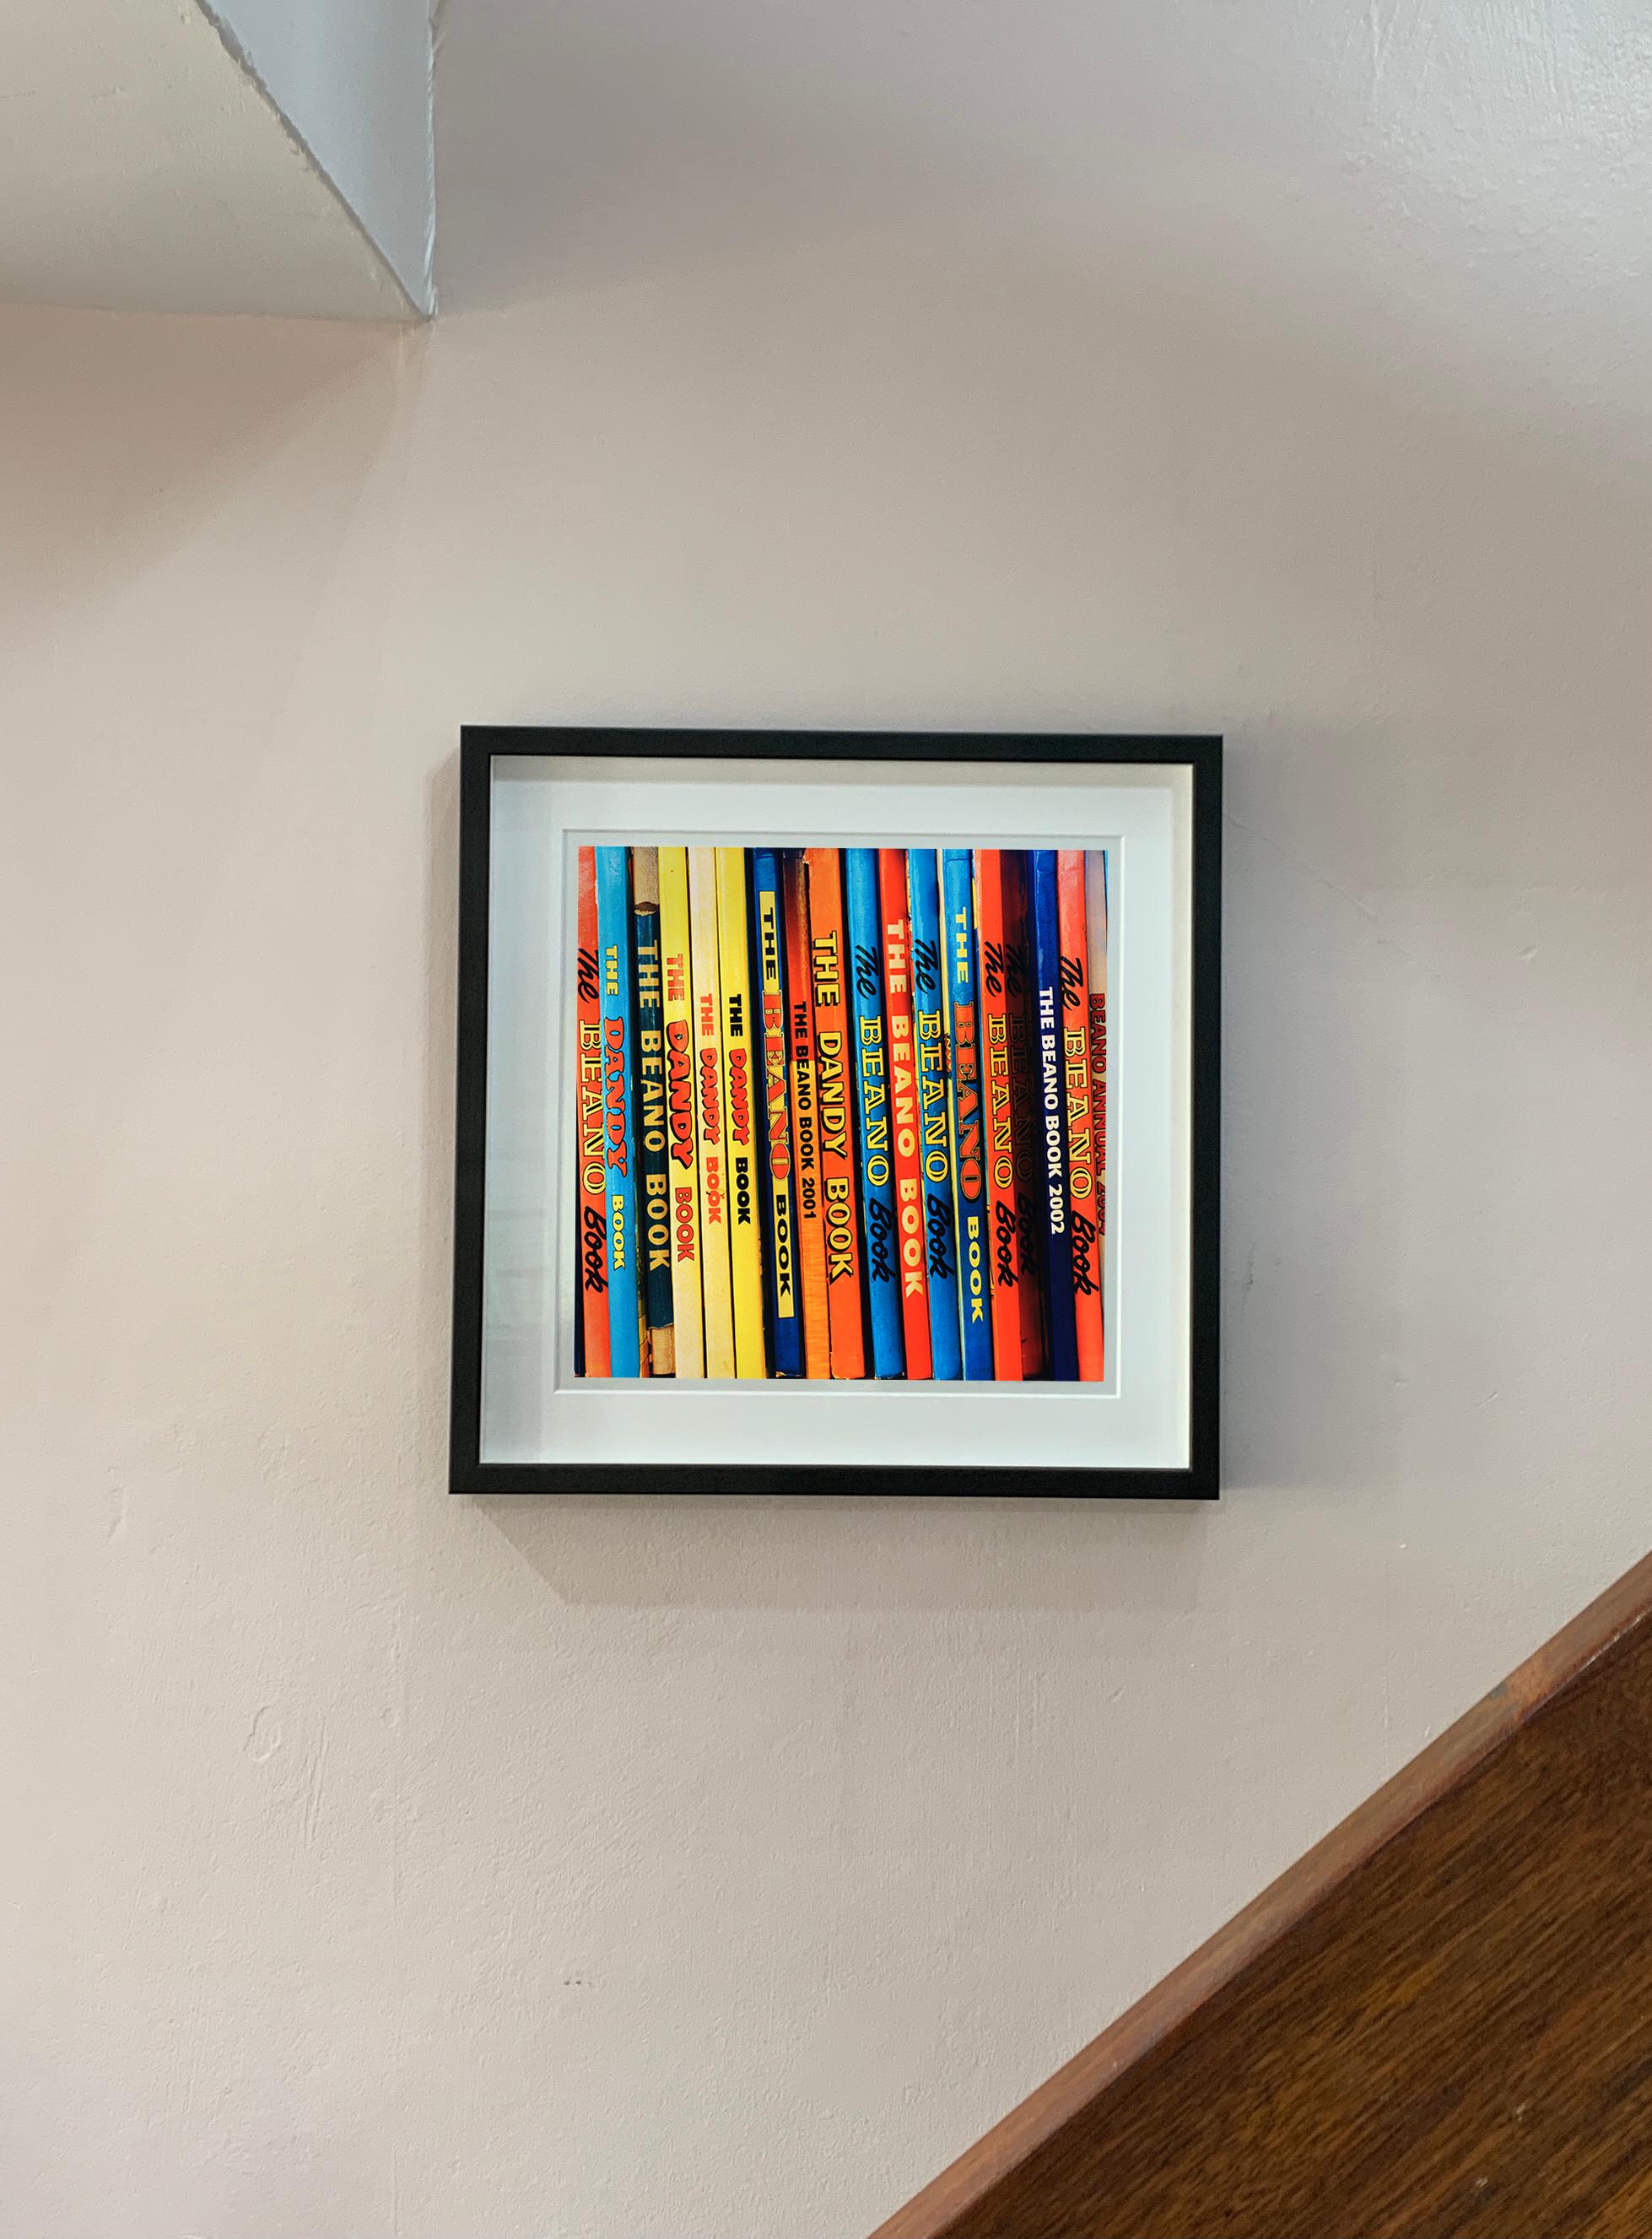 School Fun, from Richard Heeps series 'In The Treasure Trove', featuring the multicolour spines of the iconic children's Annuals, photographed in a vintage bookshop in Burnham Market, Norfolk. 

This artwork is a limited edition of 25, gloss